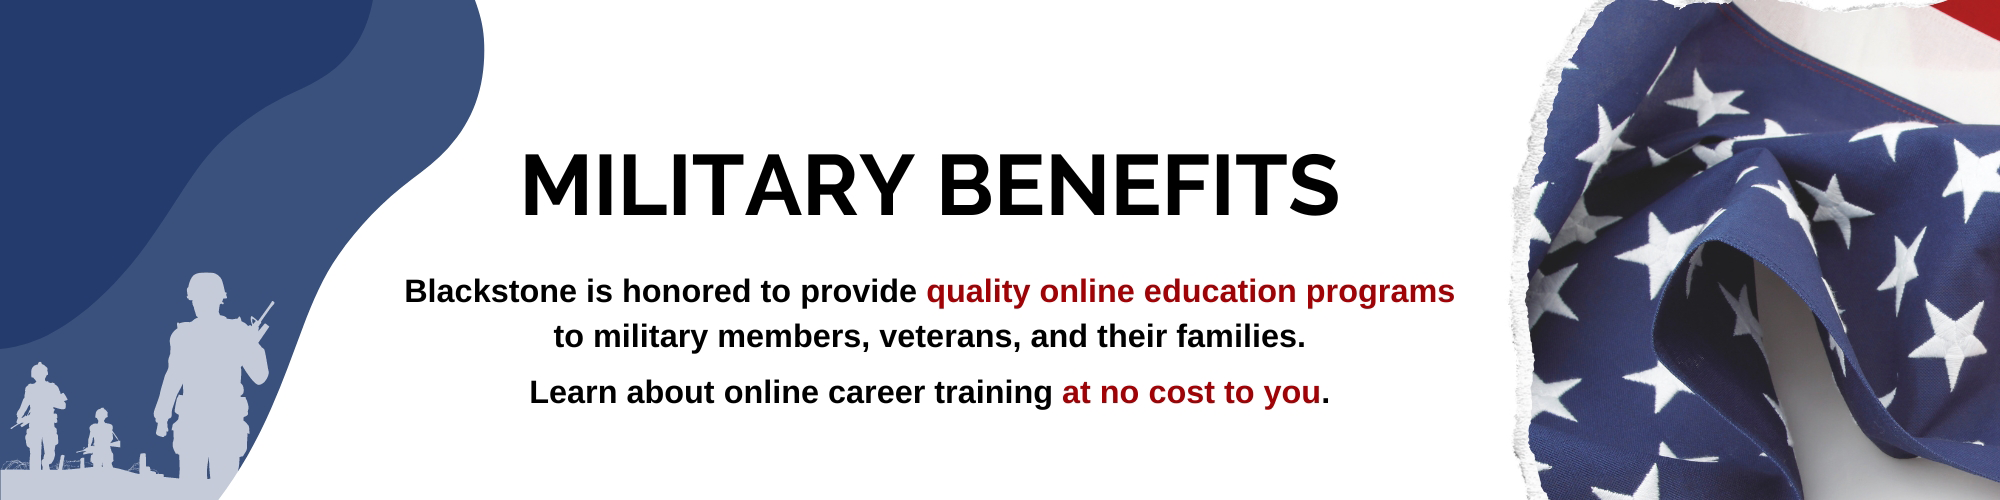 Military Benefits. blackstone is honored to provide quality online education programs to military members, veterans, and their families. Learn about online career training at no cost to you.